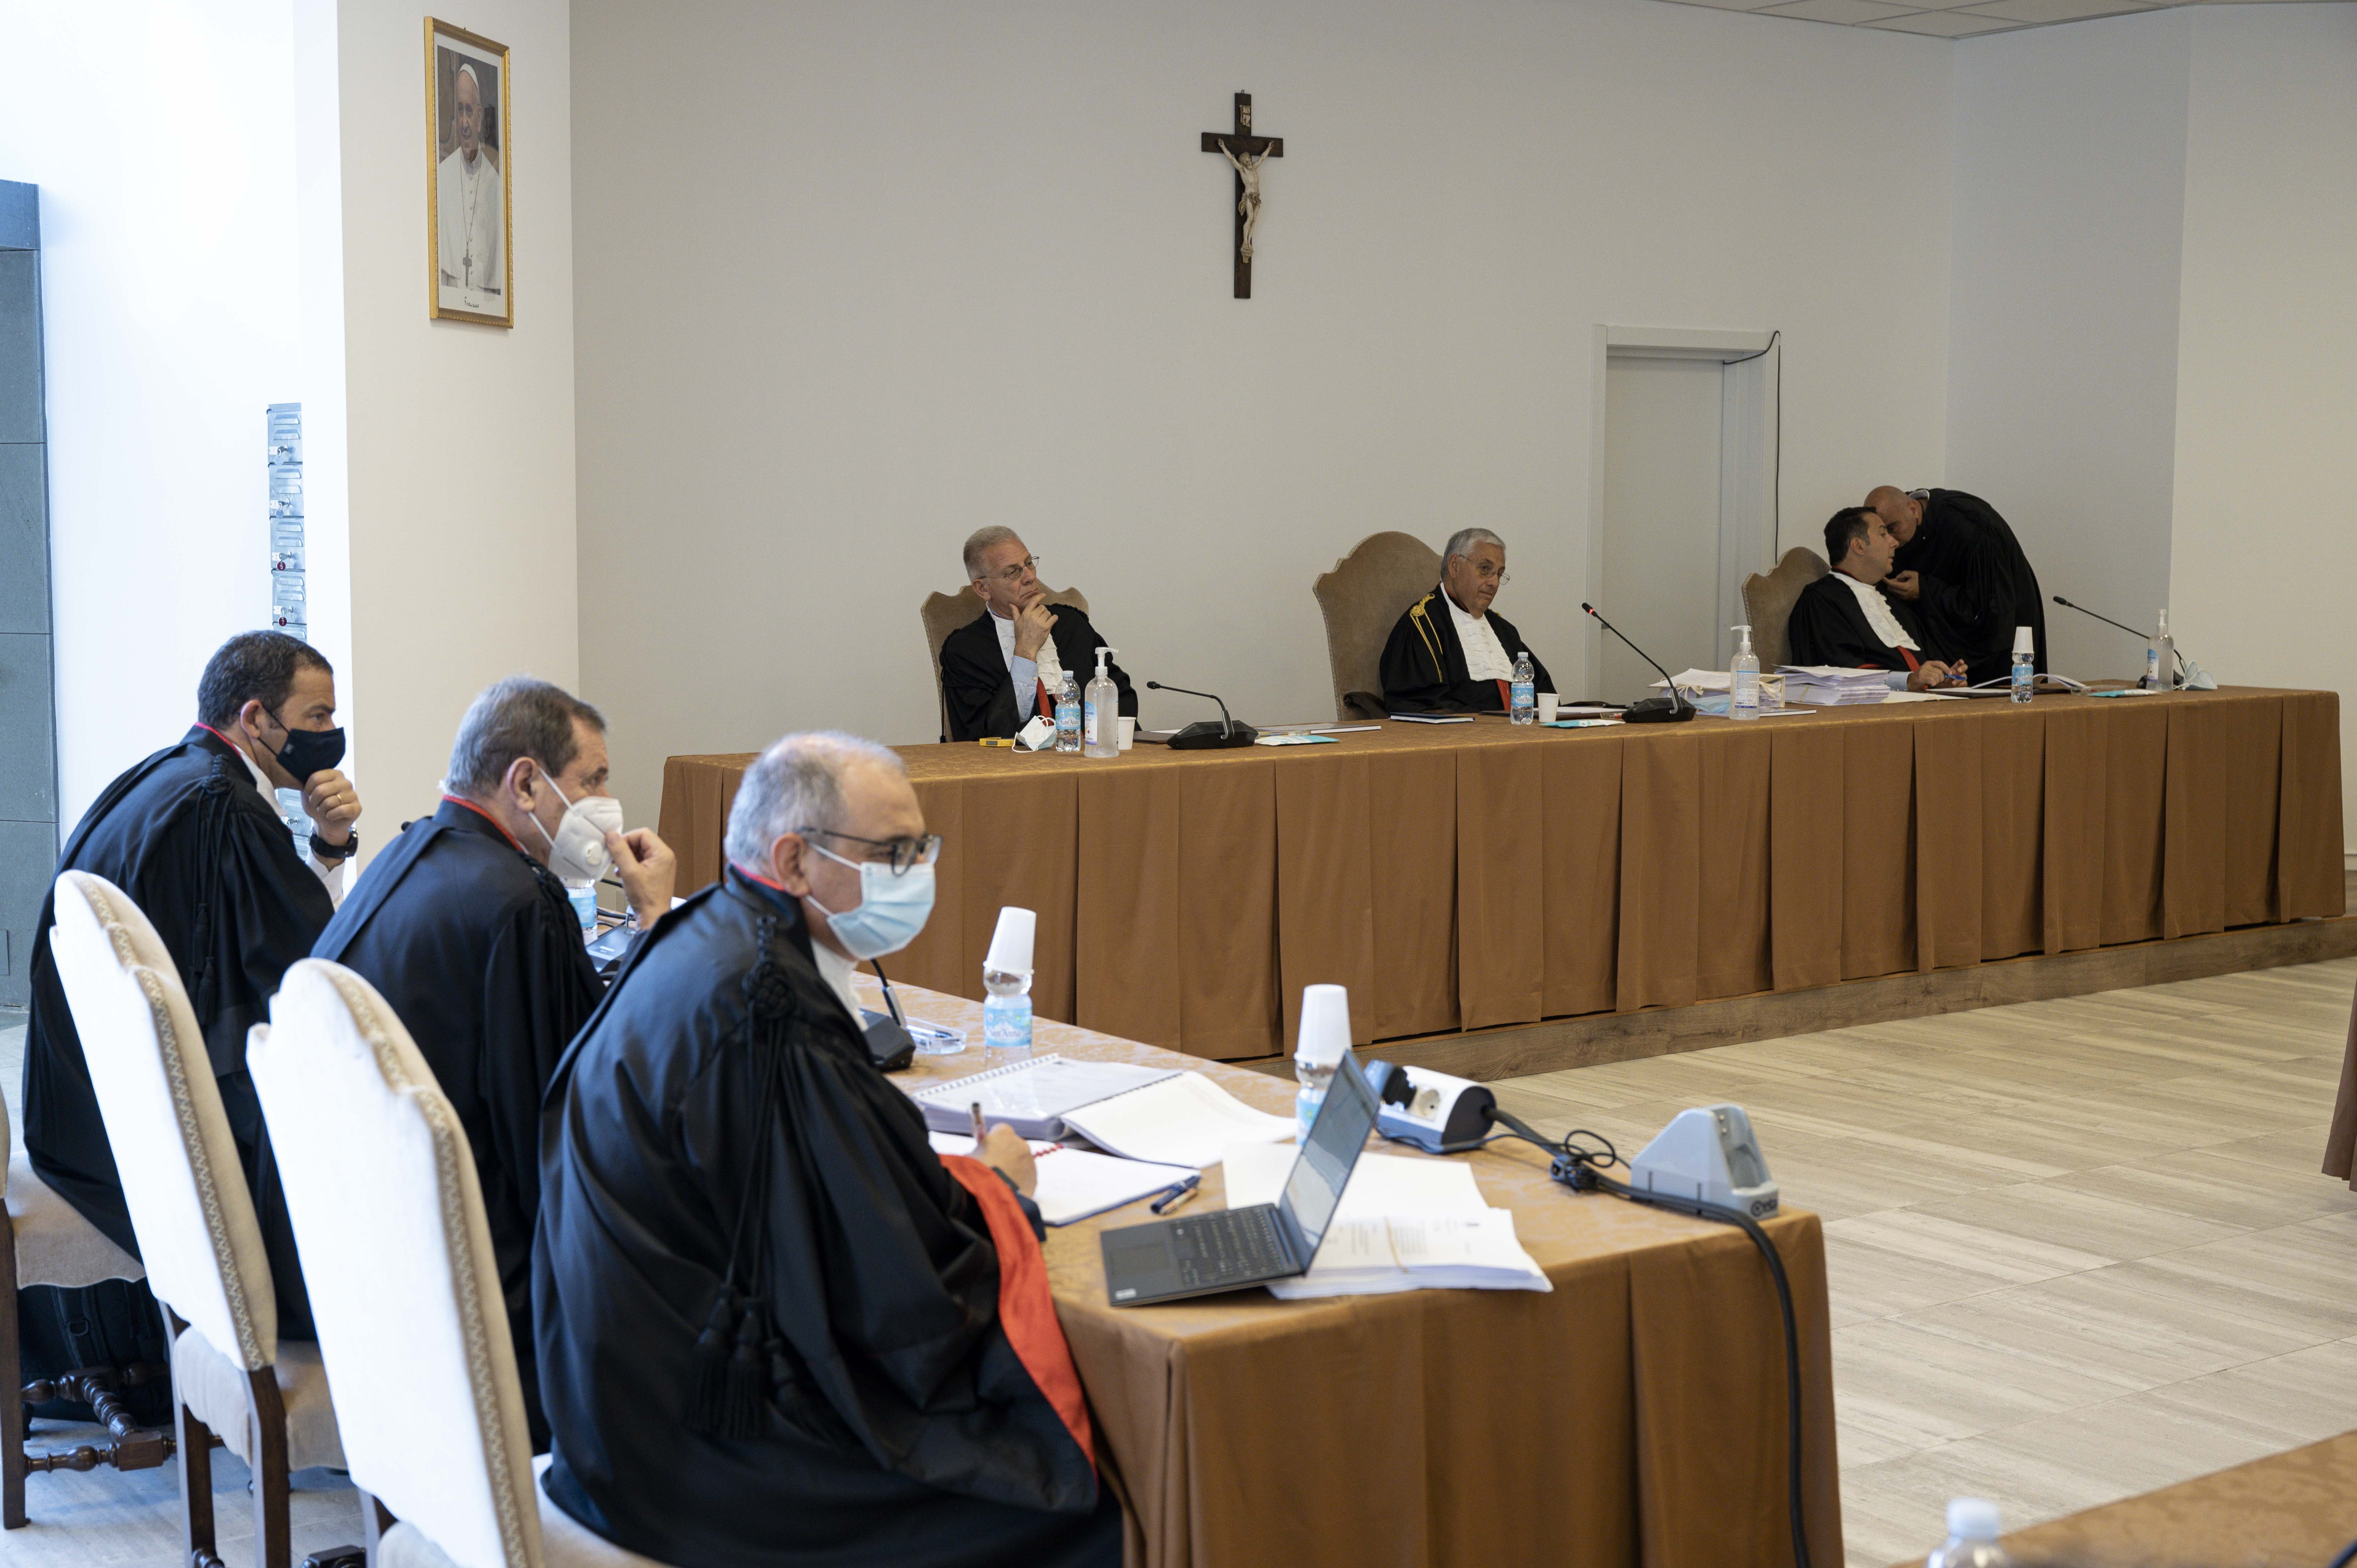 The judges of the Vatican City State criminal court -- Venerando Marano, Giuseppe Pignatone and Carlo Bonzano -- sit under a crucifix in a makeshift Vatican courtroom July 27, 2021, as the trial of 10 defendants in a financial malfeasance case begins. (CN